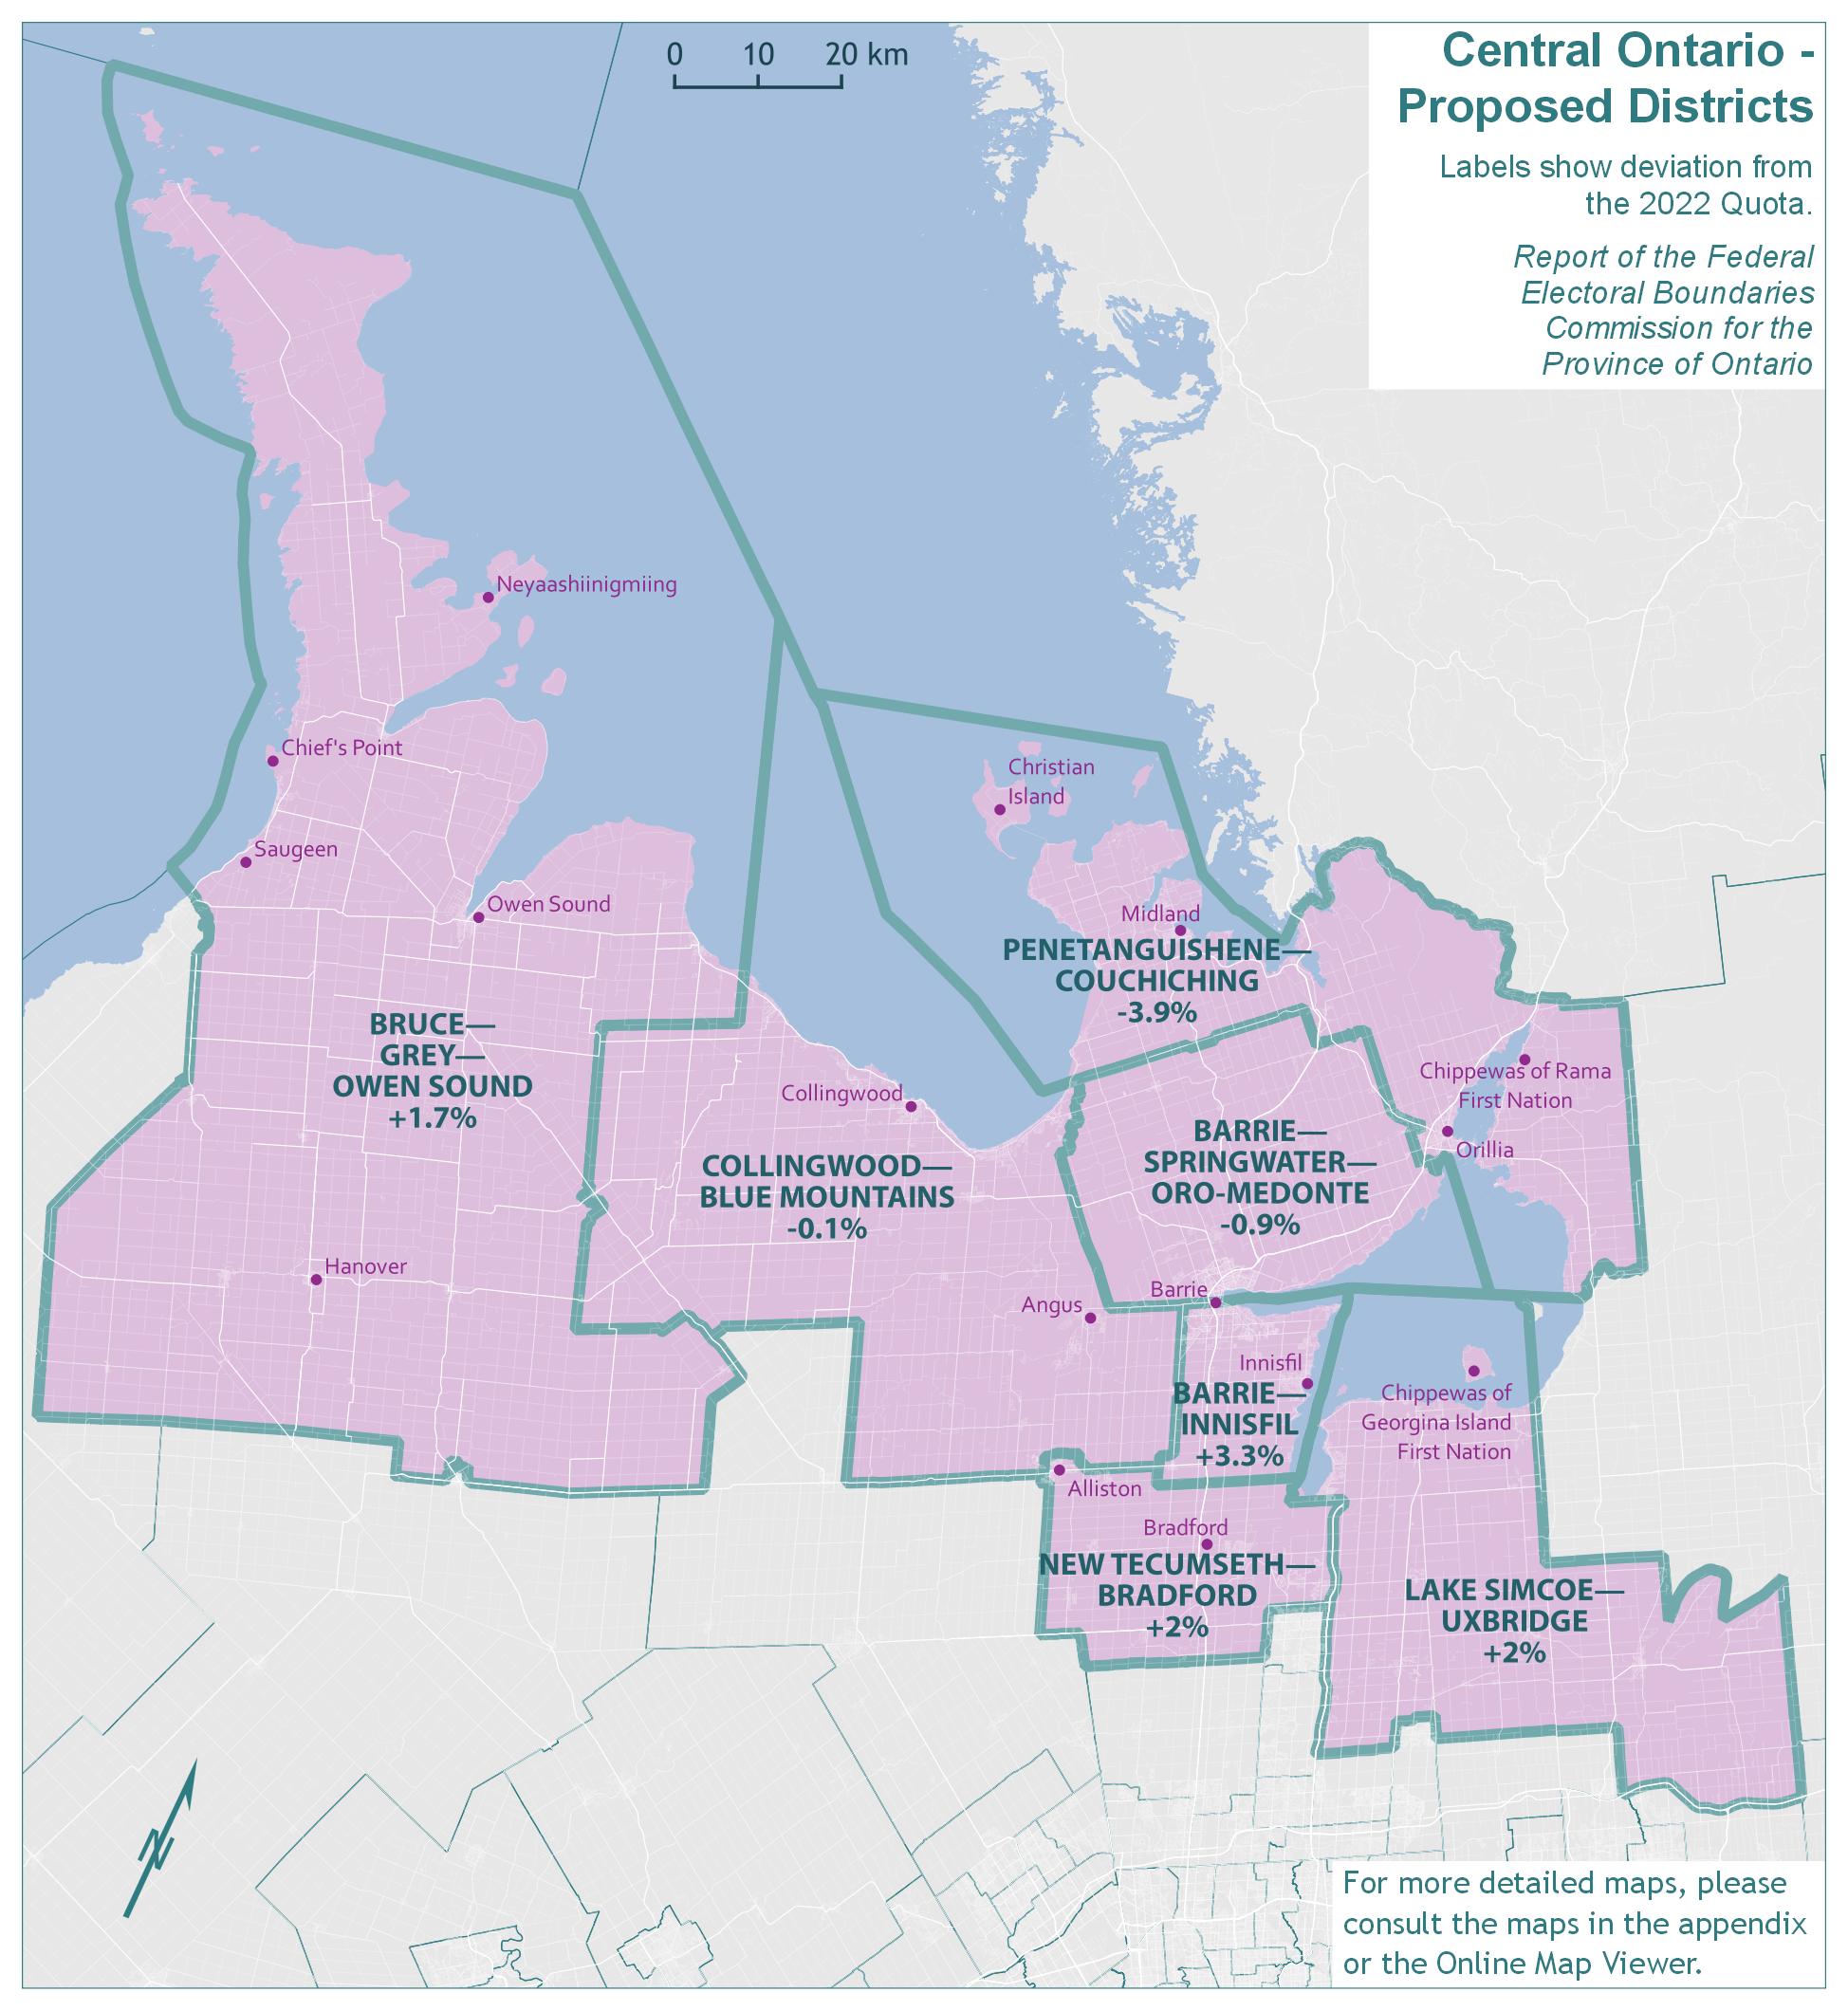 Central Ontario - Proposed Districts